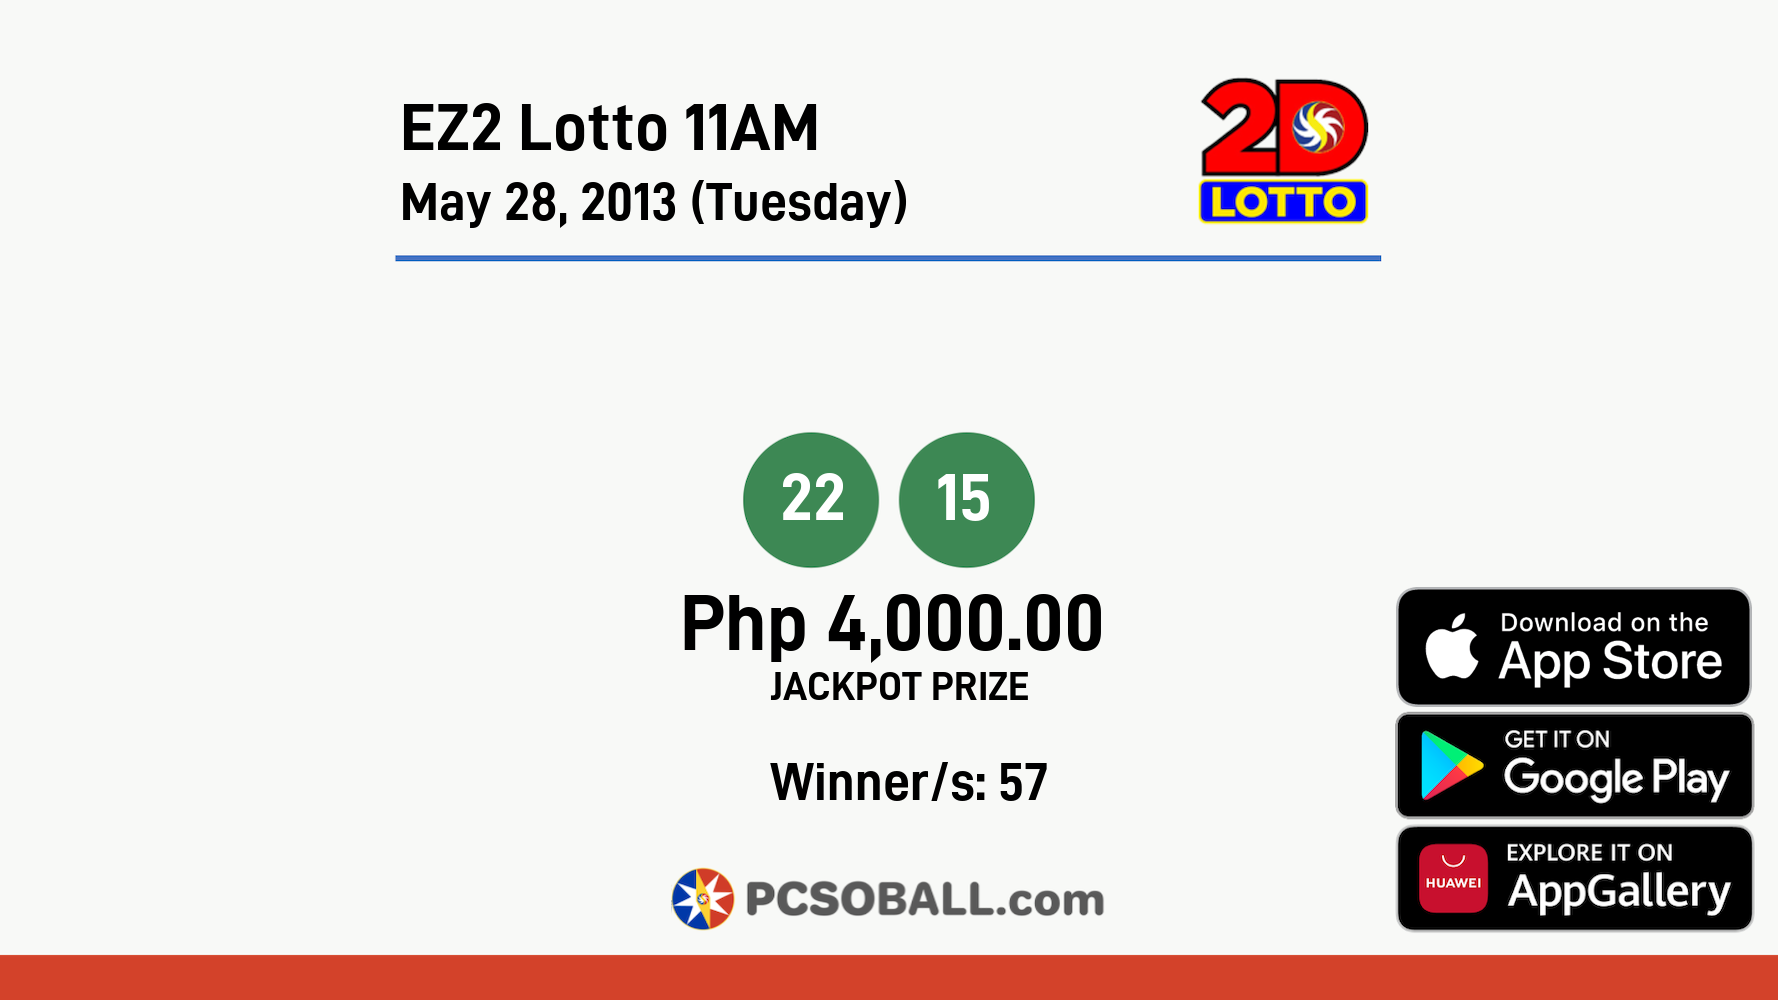 EZ2 Lotto 11AM May 28, 2013 (Tuesday) Result